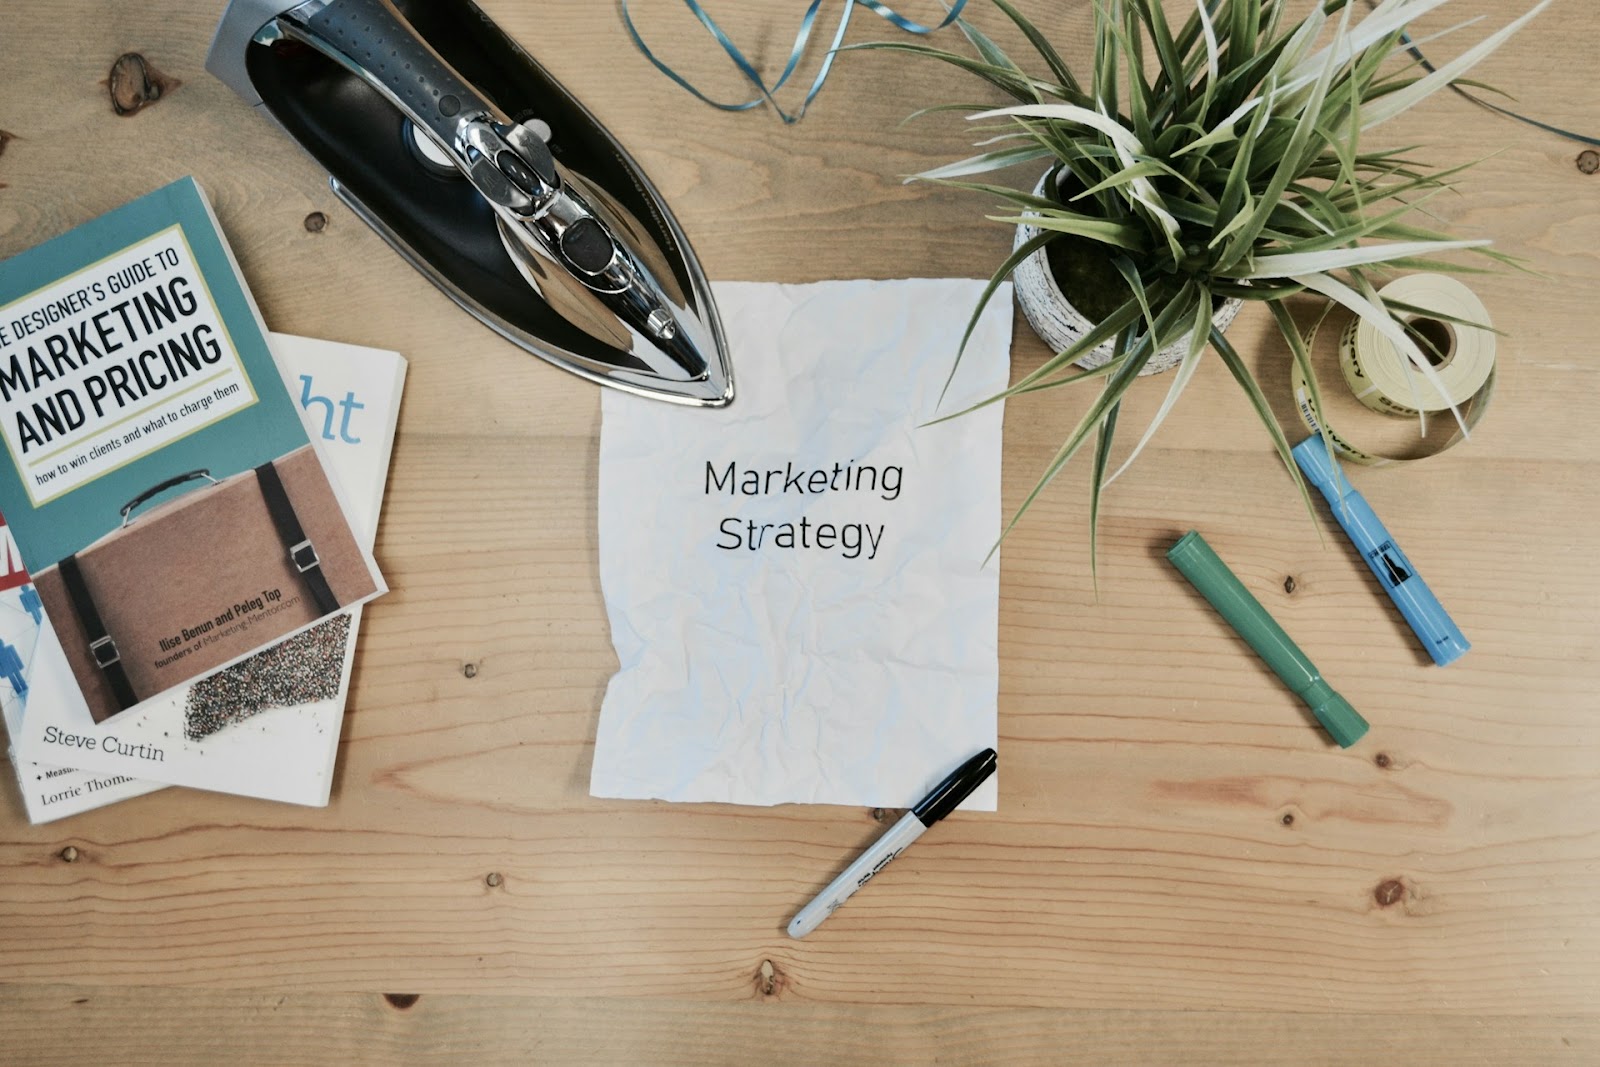 6 Trends and Innovations Shaping Business Marketing Strategies https://unsplash.com/photos/white-printing-paper-with-marketing-strategy-text-yktK2qaiVHI